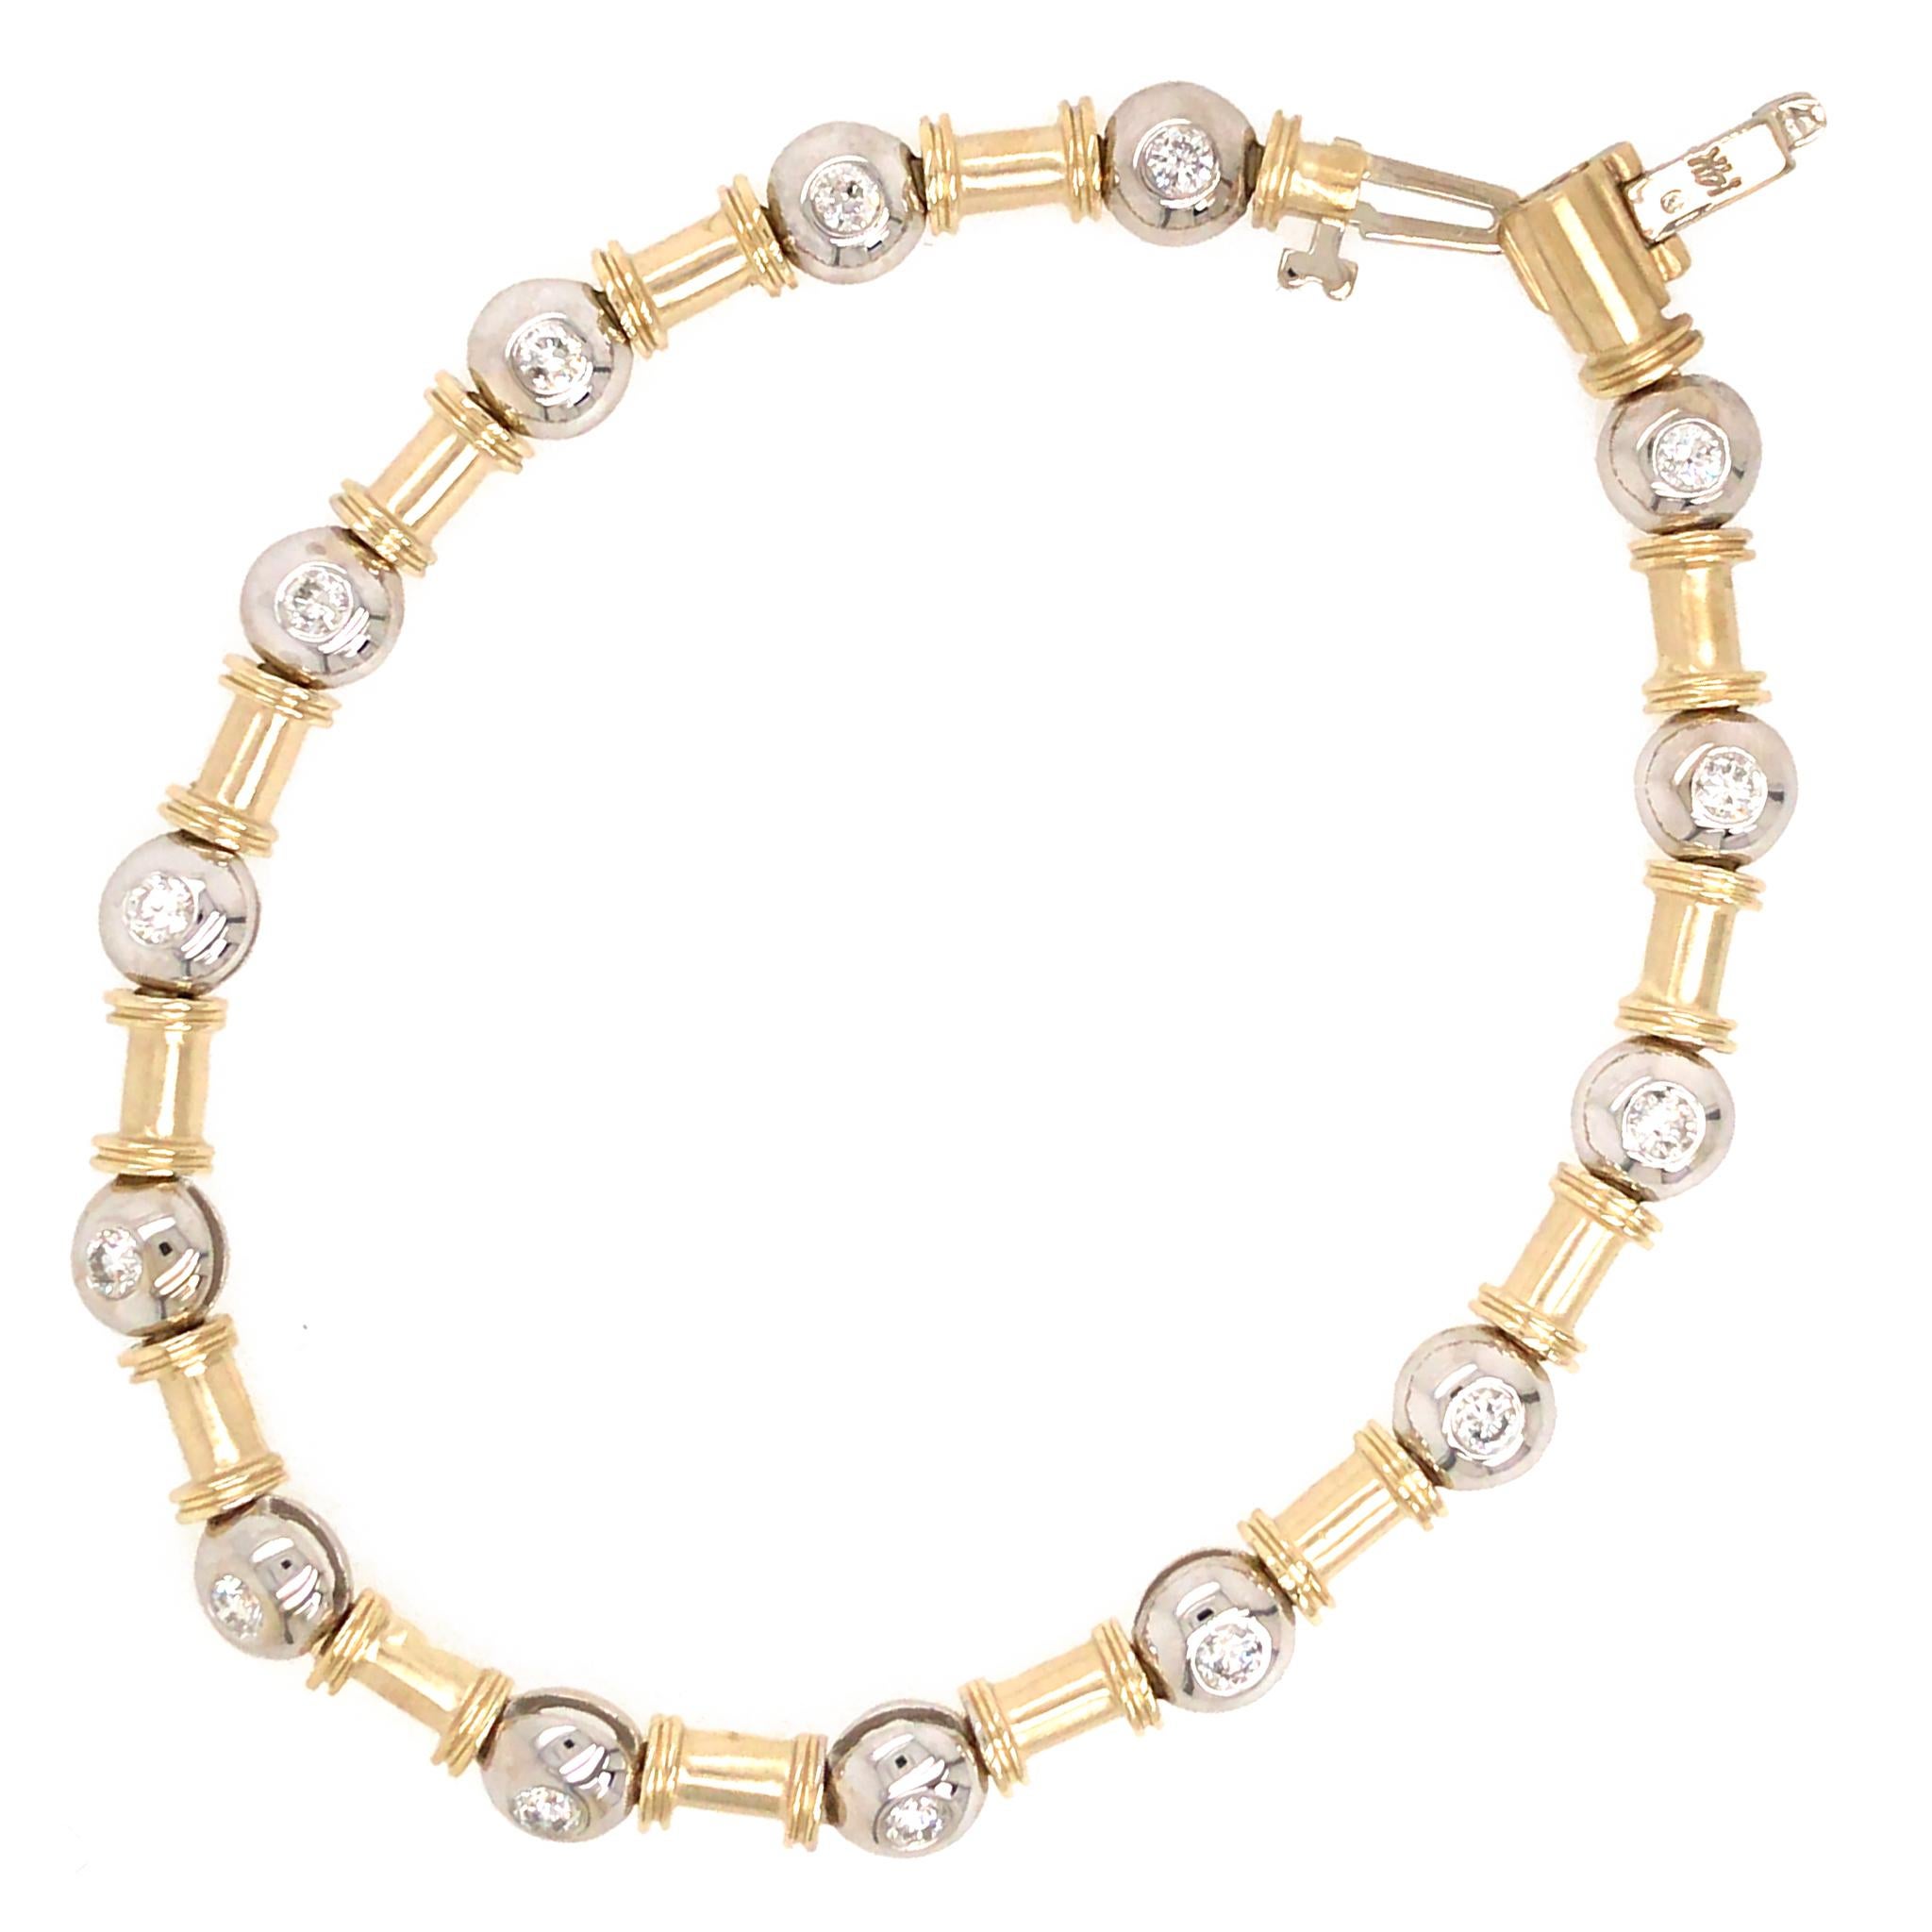 14k Yellow Gold & 14k White Gold
Diamond: 0.56 ct twd (estimated)
Total Weight: 15.5 grams
Bracelet Length: 7 inches